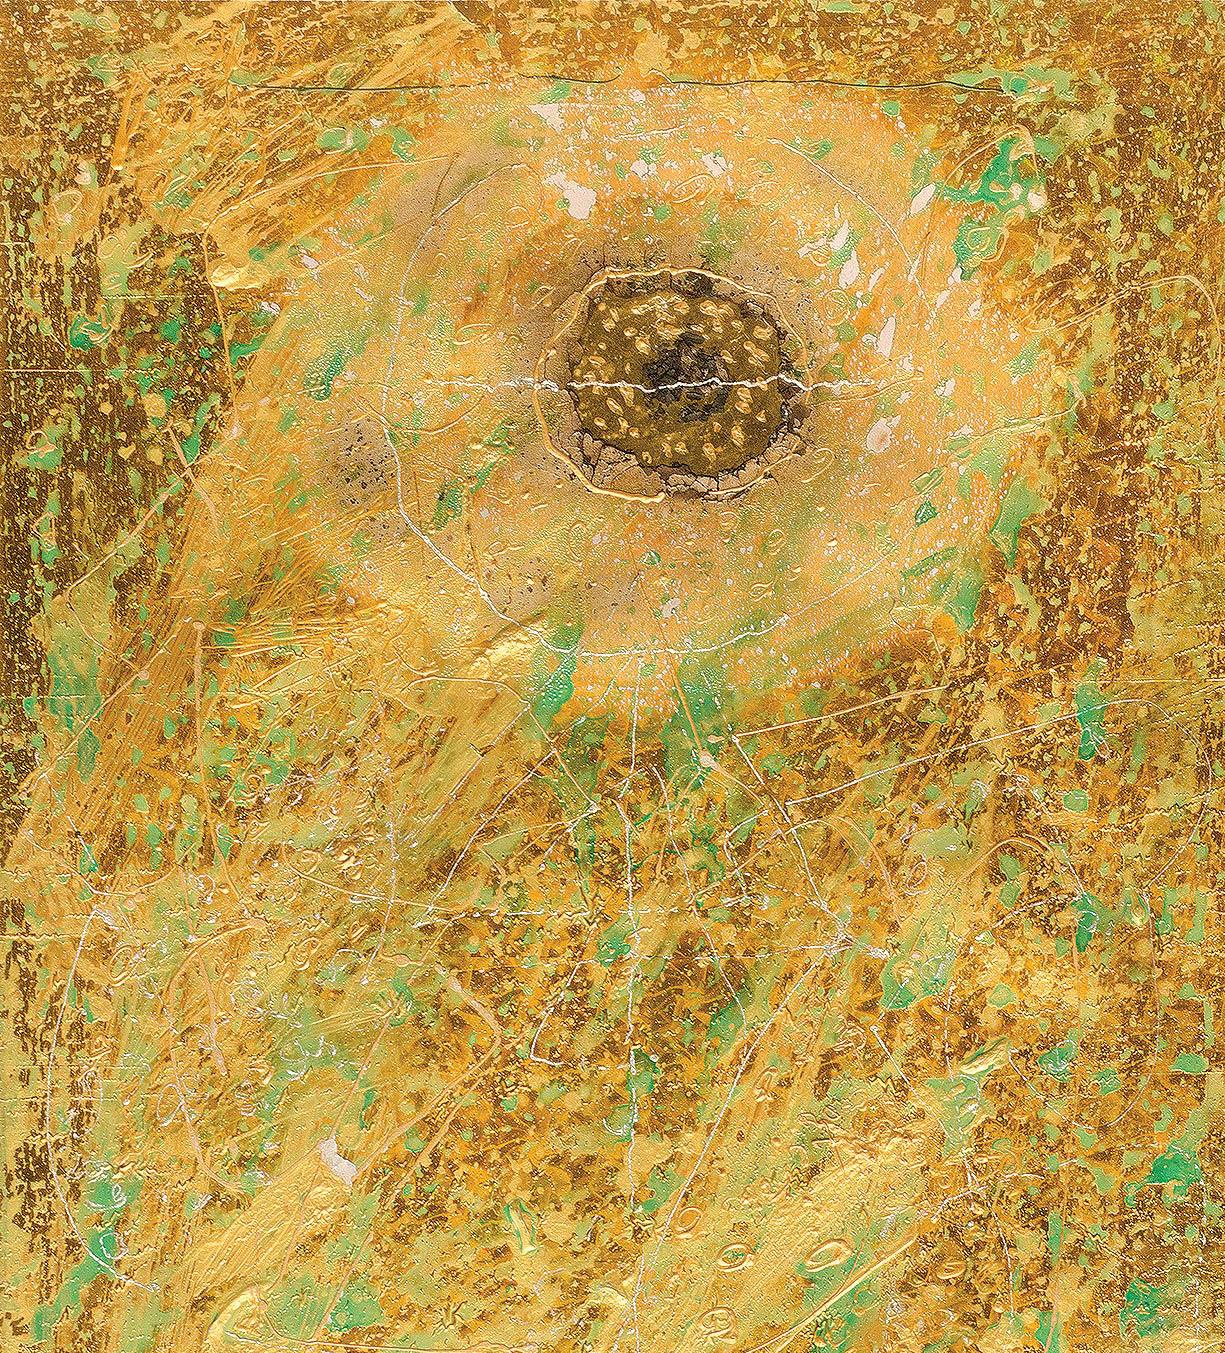 Collage Series VII, Mixed Media, Paper, Foil, Acrylic, Yellow, Green 